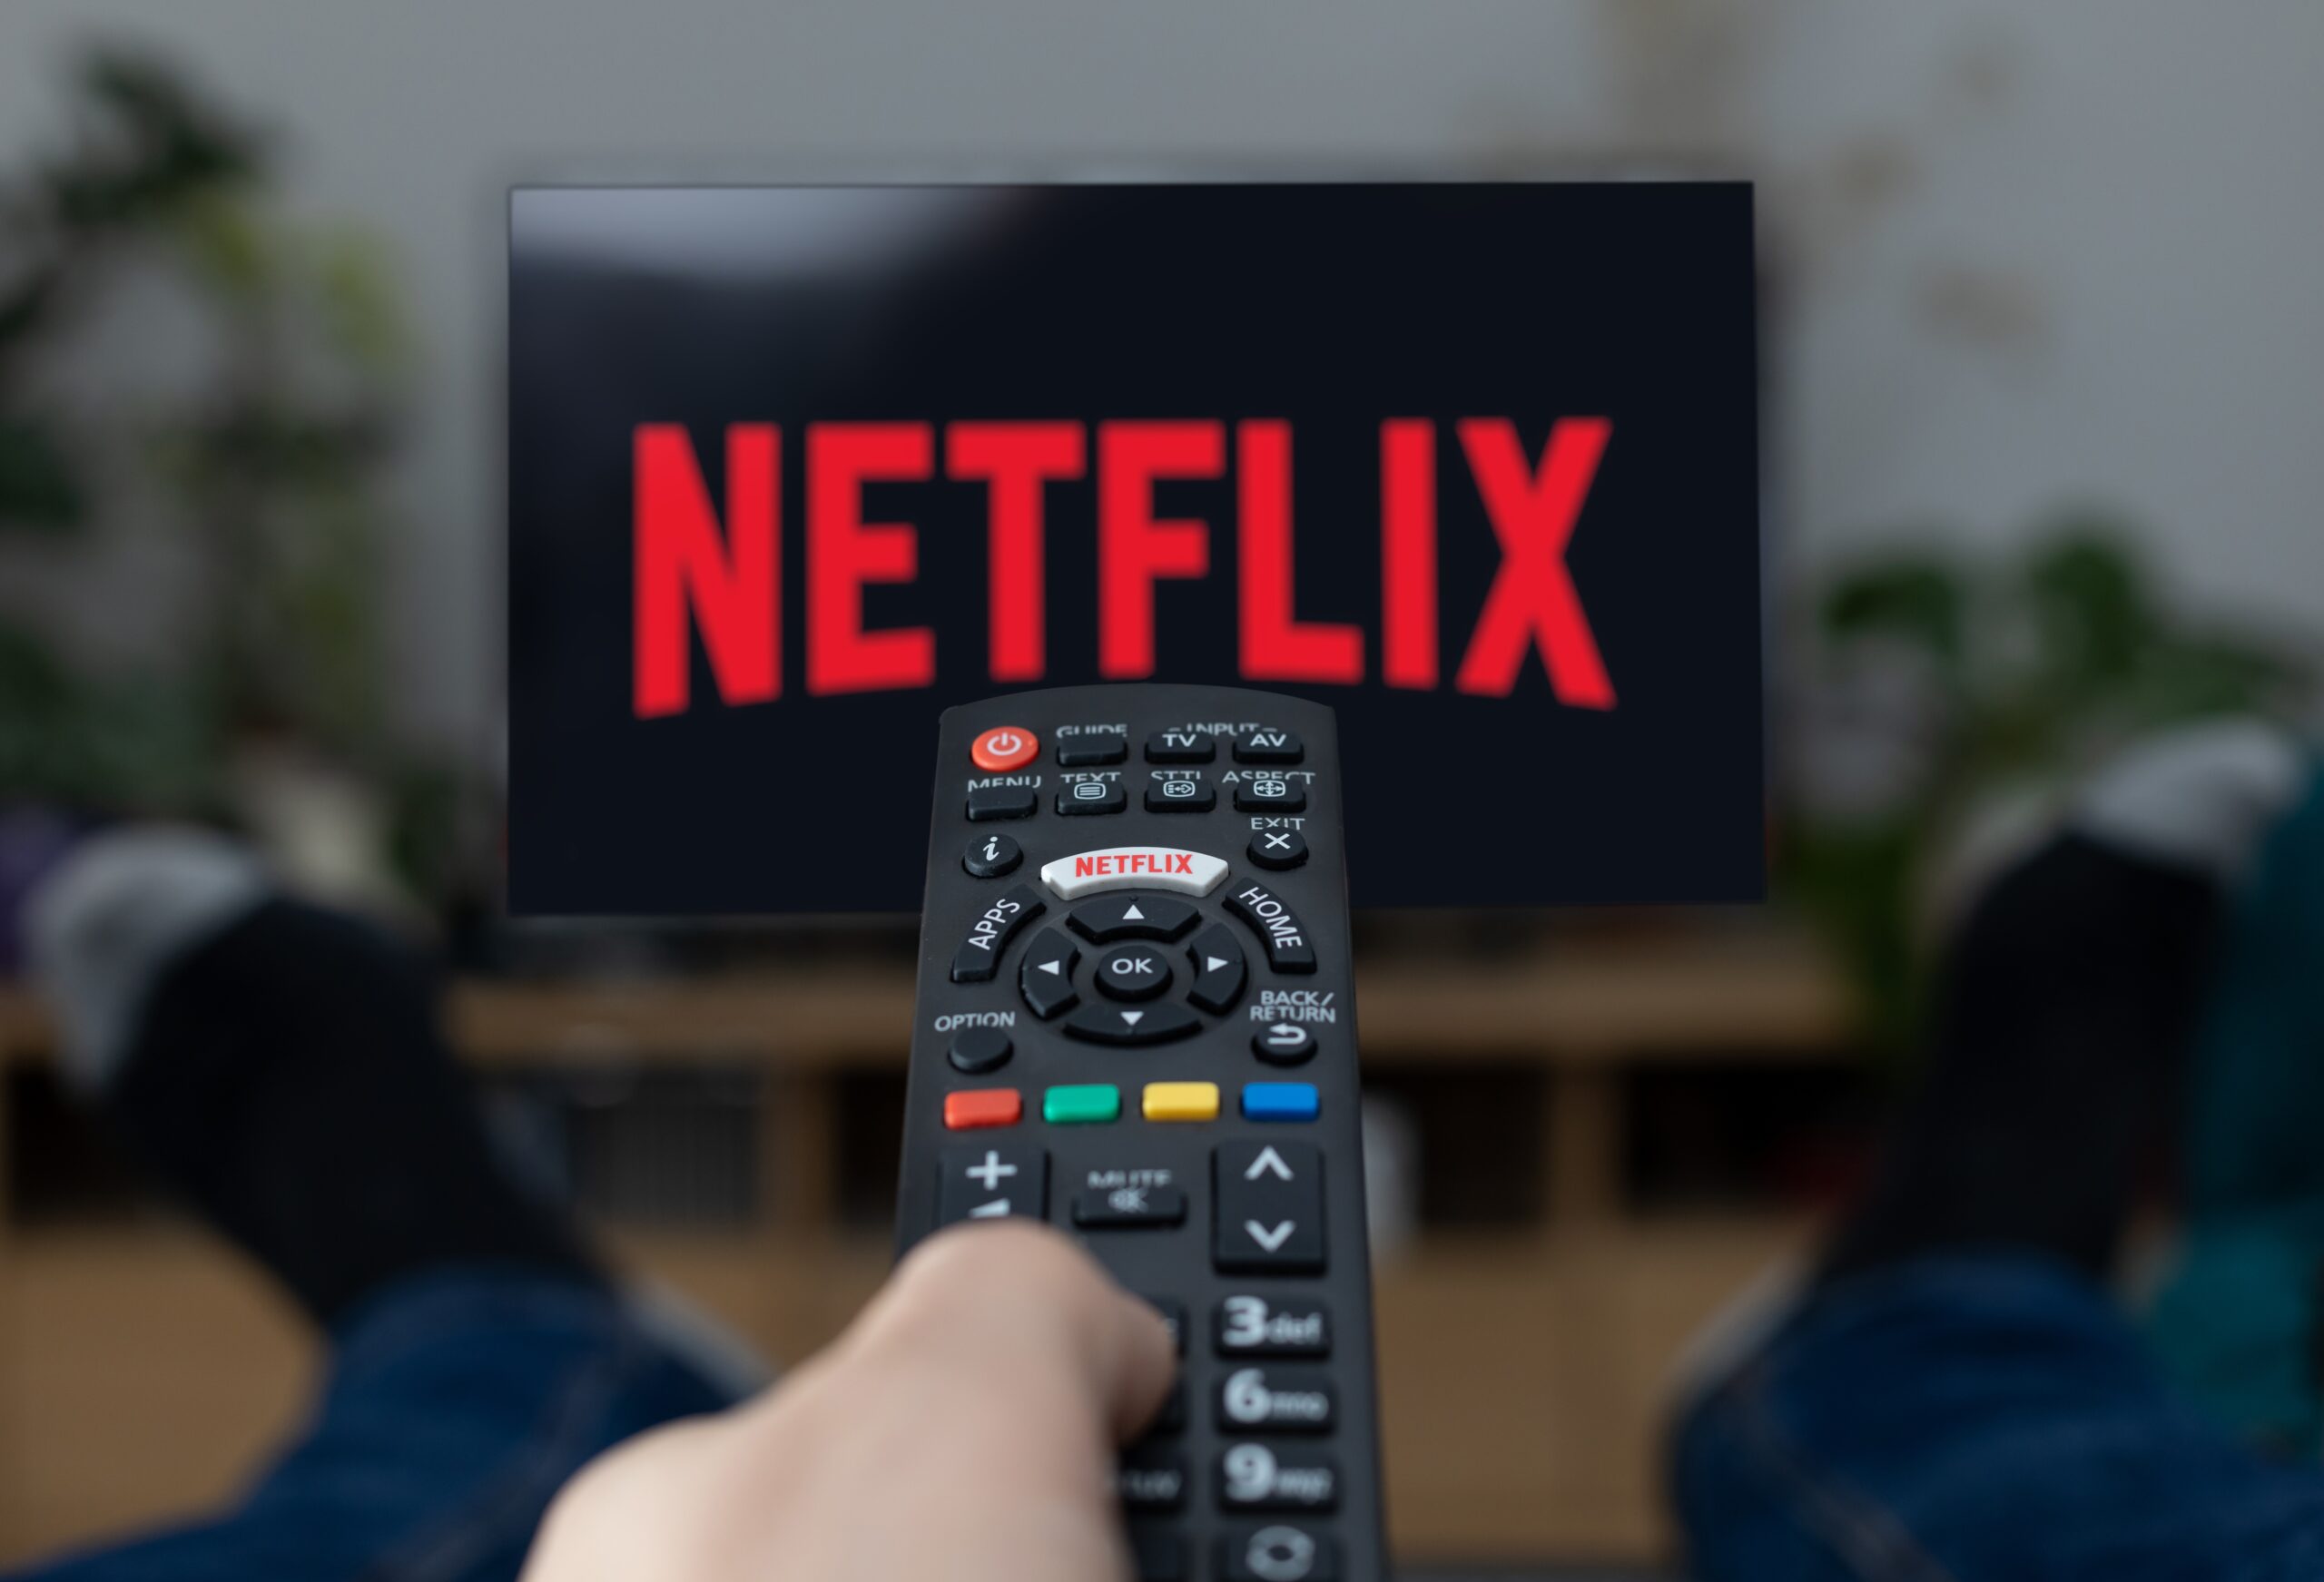 How to cancel the extra member on Netflix 